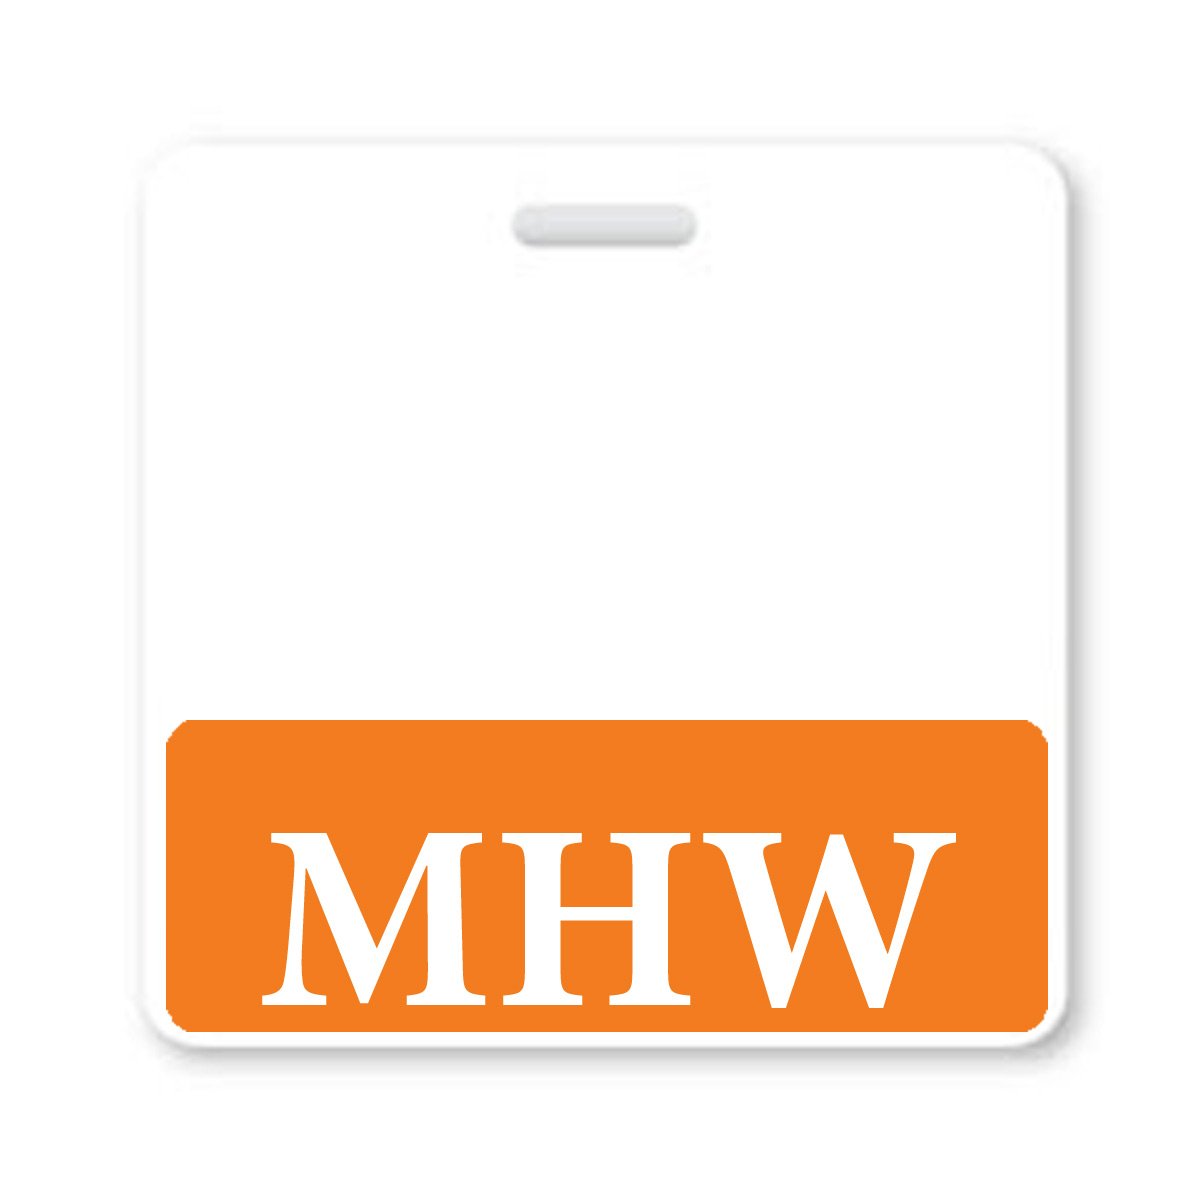 Square white badge with an orange bottom section and an orange border, displaying the white uppercase letters "MHW." This MHW Horizontal Badge Buddy with Orange Border is perfect for quick identification.